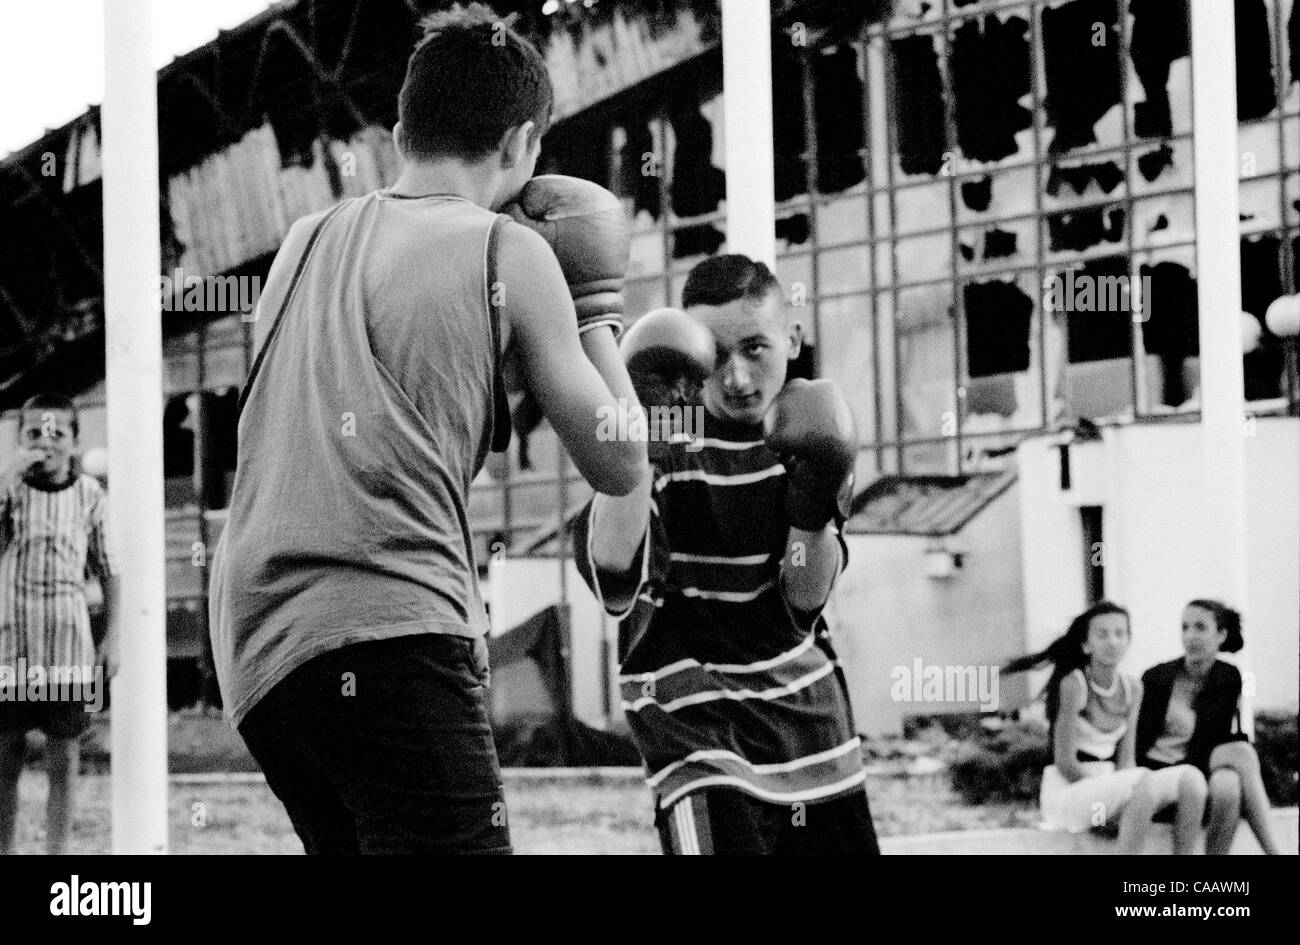 The boxing club practices outside the destroyed sports complex in Pristina, Kosovo. Stock Photo